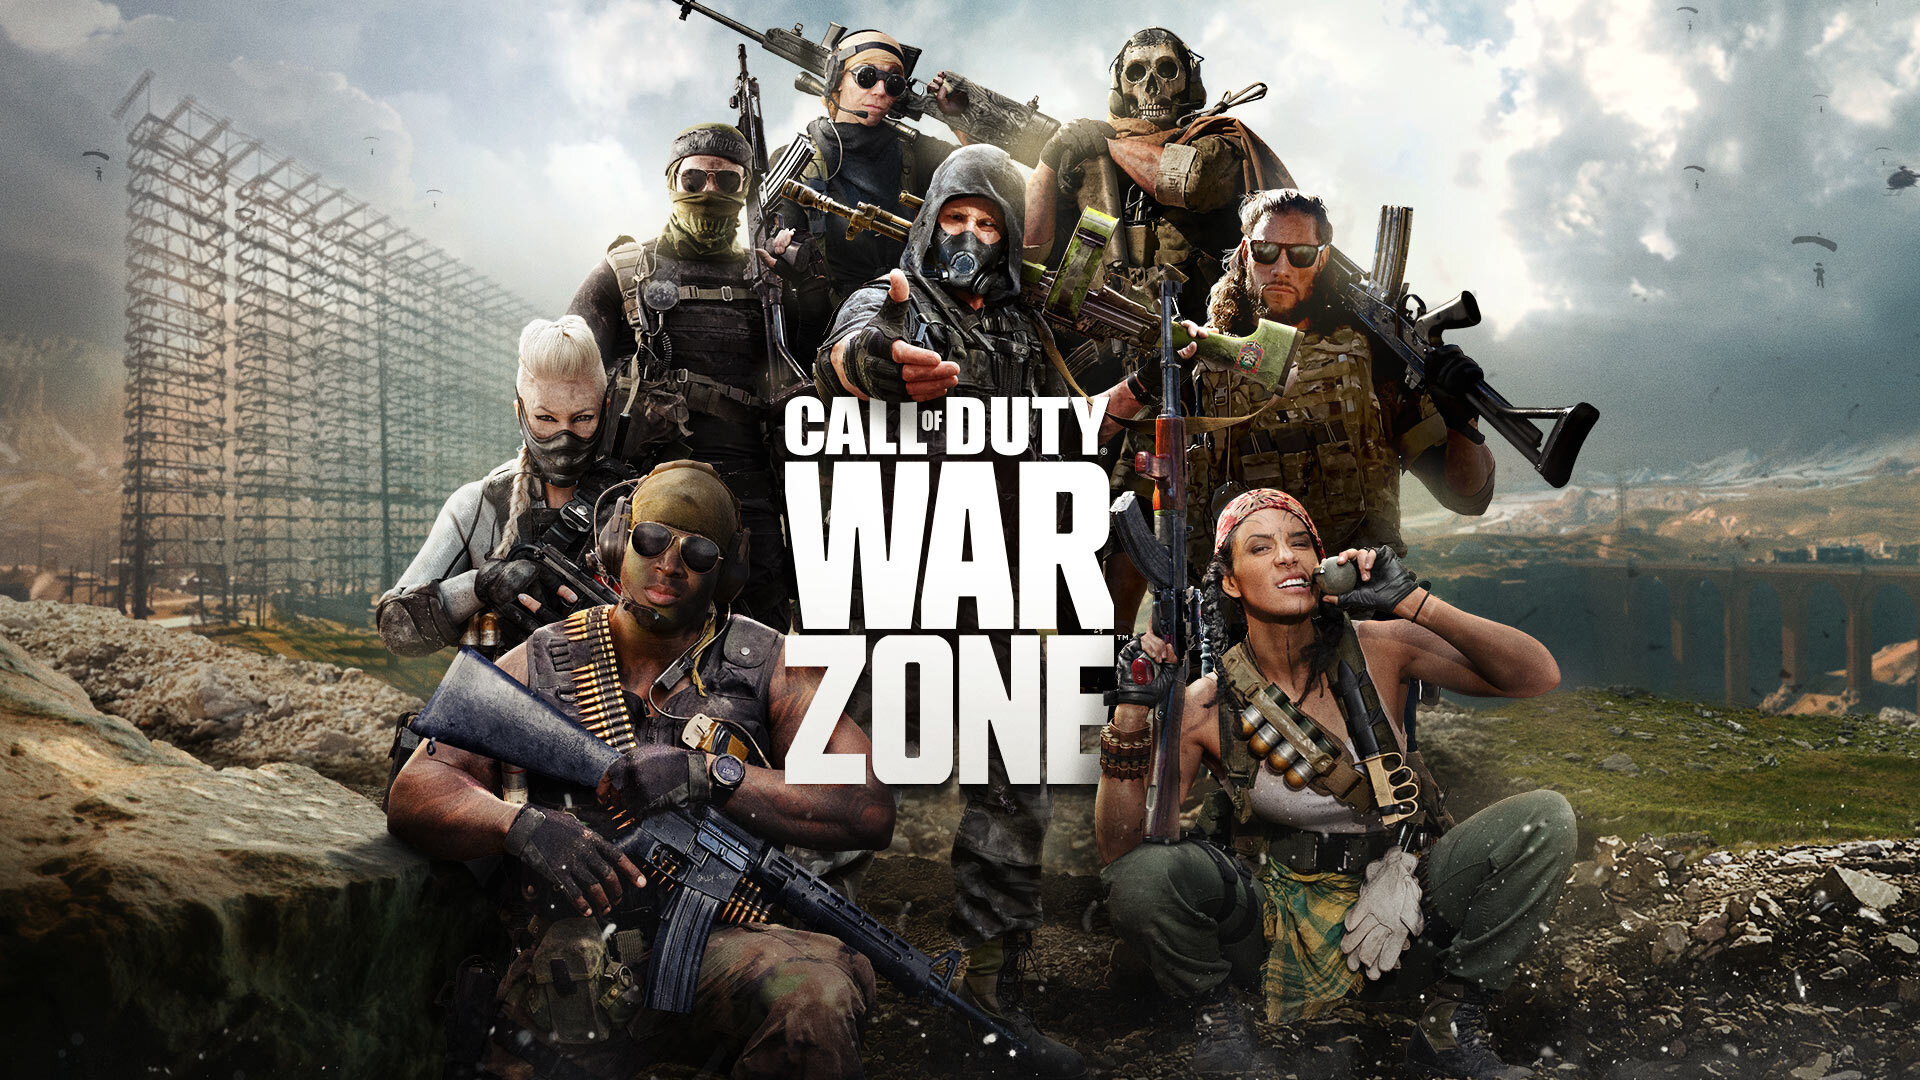 Call of duty warzone mobile play market. Call of Duty Warzone. Call of Duty Warzone 2. Call of Duty ваrzonee 2. Call of Duty Warzone poster.